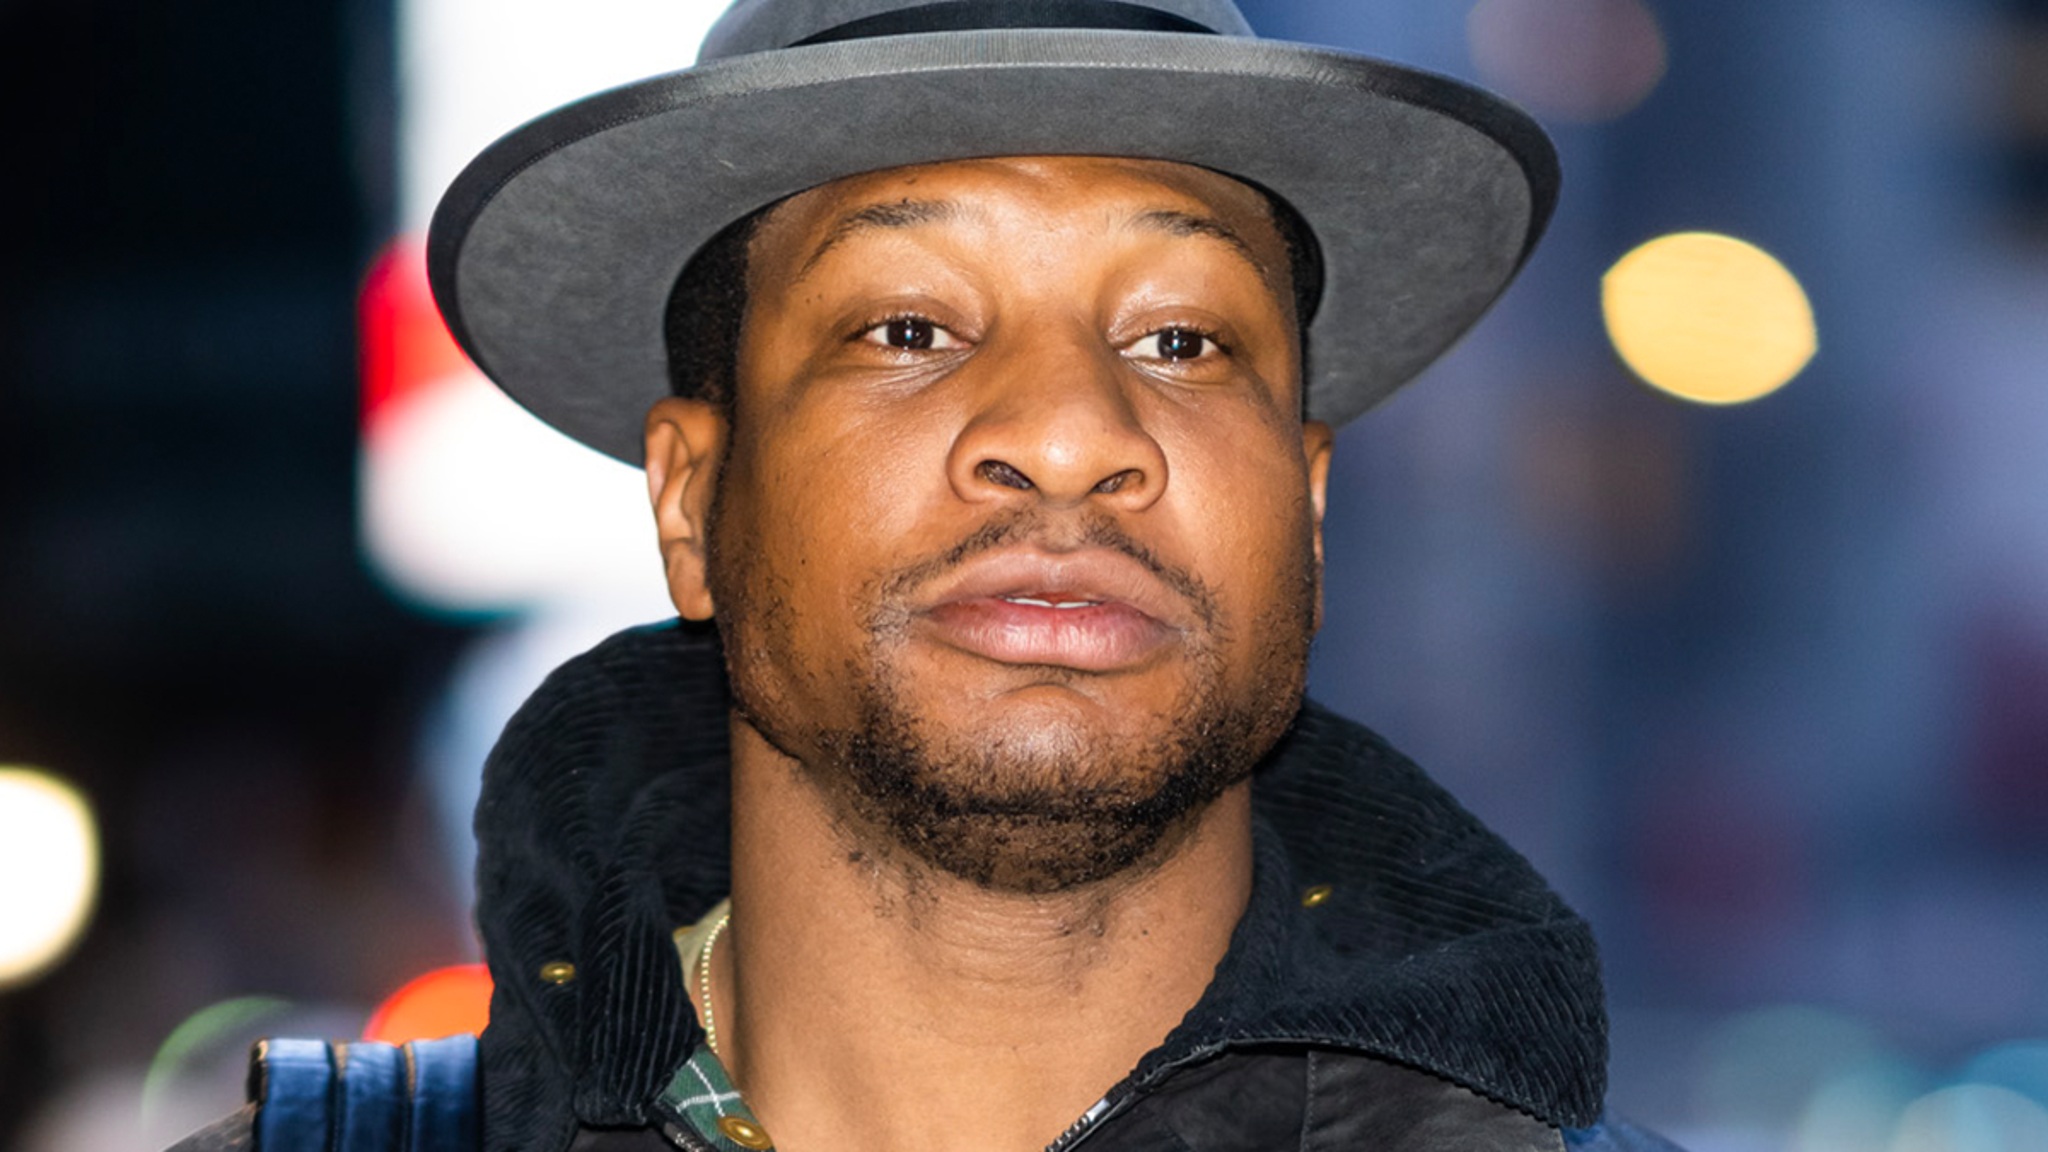 Jonathan Majors’ Attorney Says He’s ‘Completely Innocent’ in Assault Case